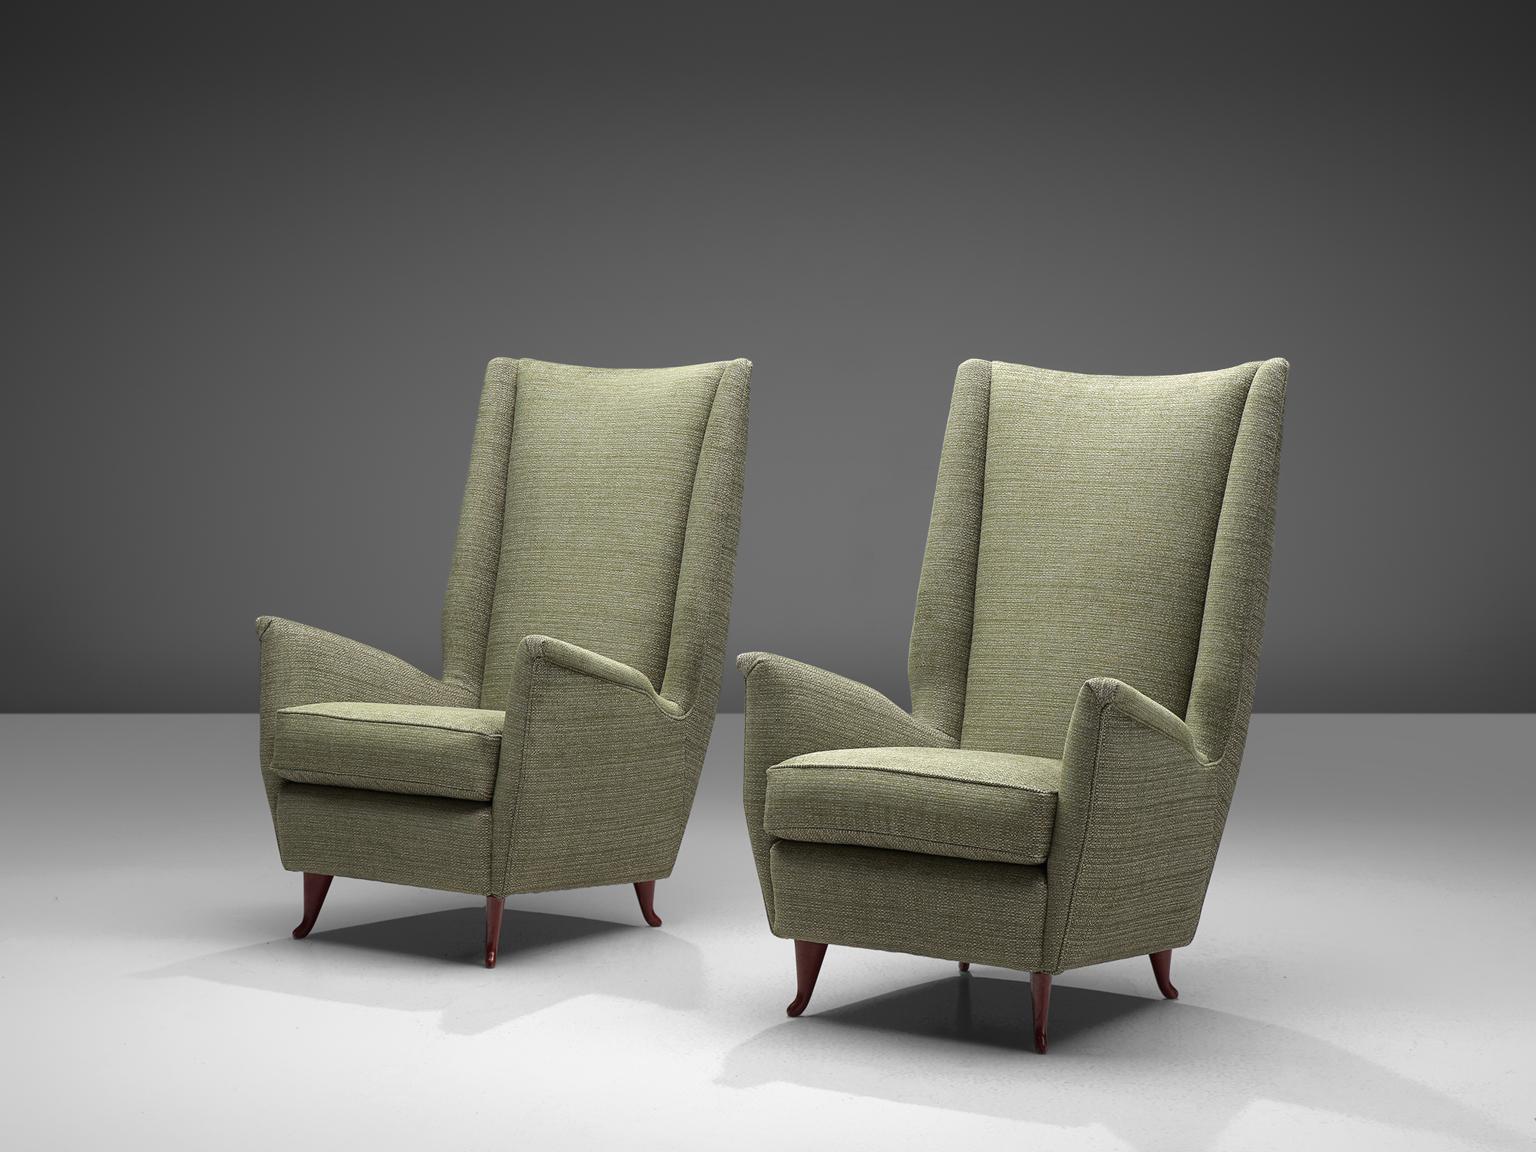 ISA, pair of lounge chairs, reupholstered in green fabric and wood, Italy, 1950s. 

An elegant pair of Italian Lounge chairs in the manner of Gio Ponti. What really characterizes this chairs is their high backs in combination with the lumbar